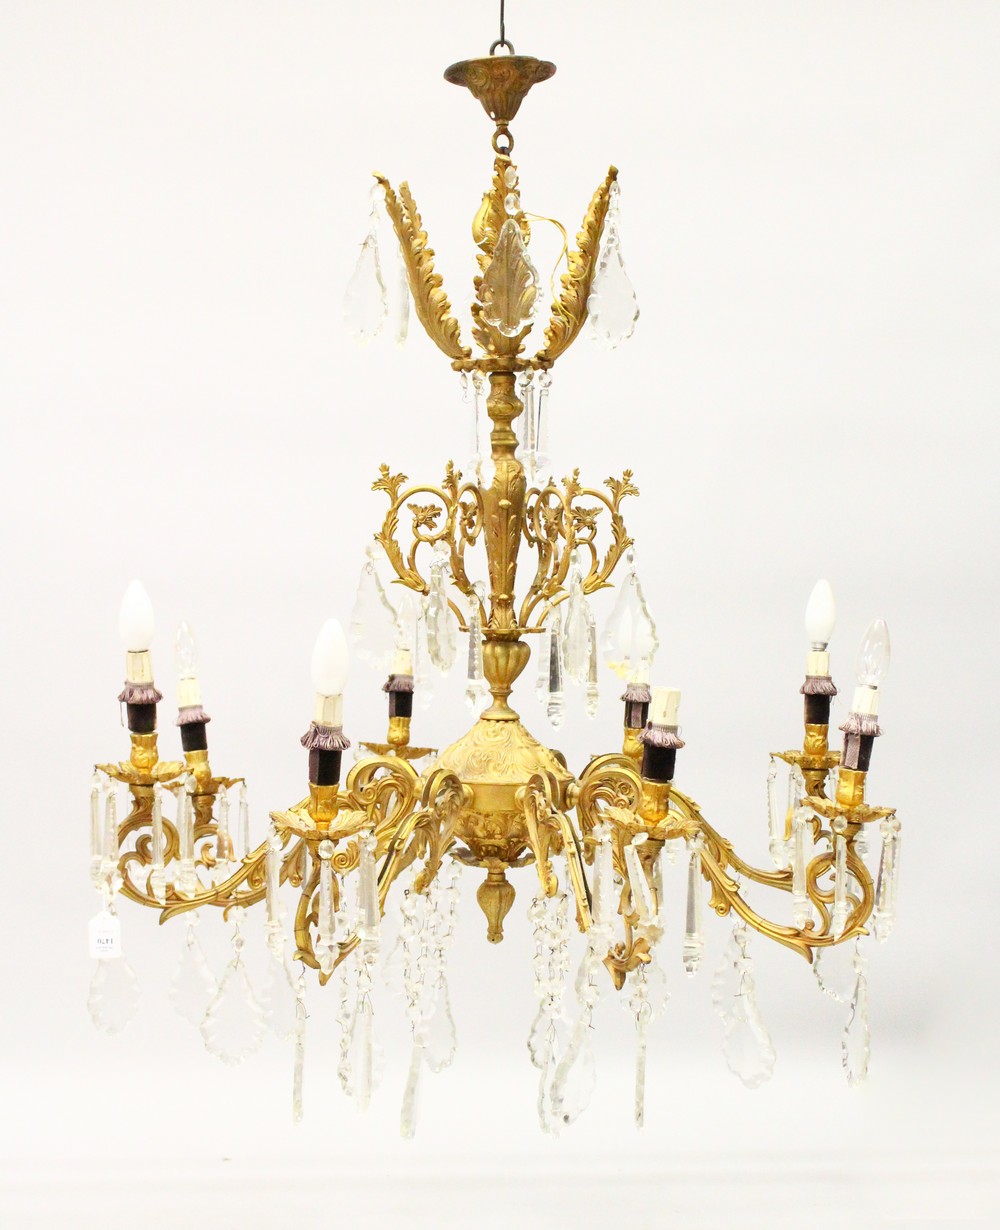 A LARGE LOUIS XVITH DESIGN GILT METAL EIGHT BRANCH CHANDELIER with over 200 cut crystal drops.